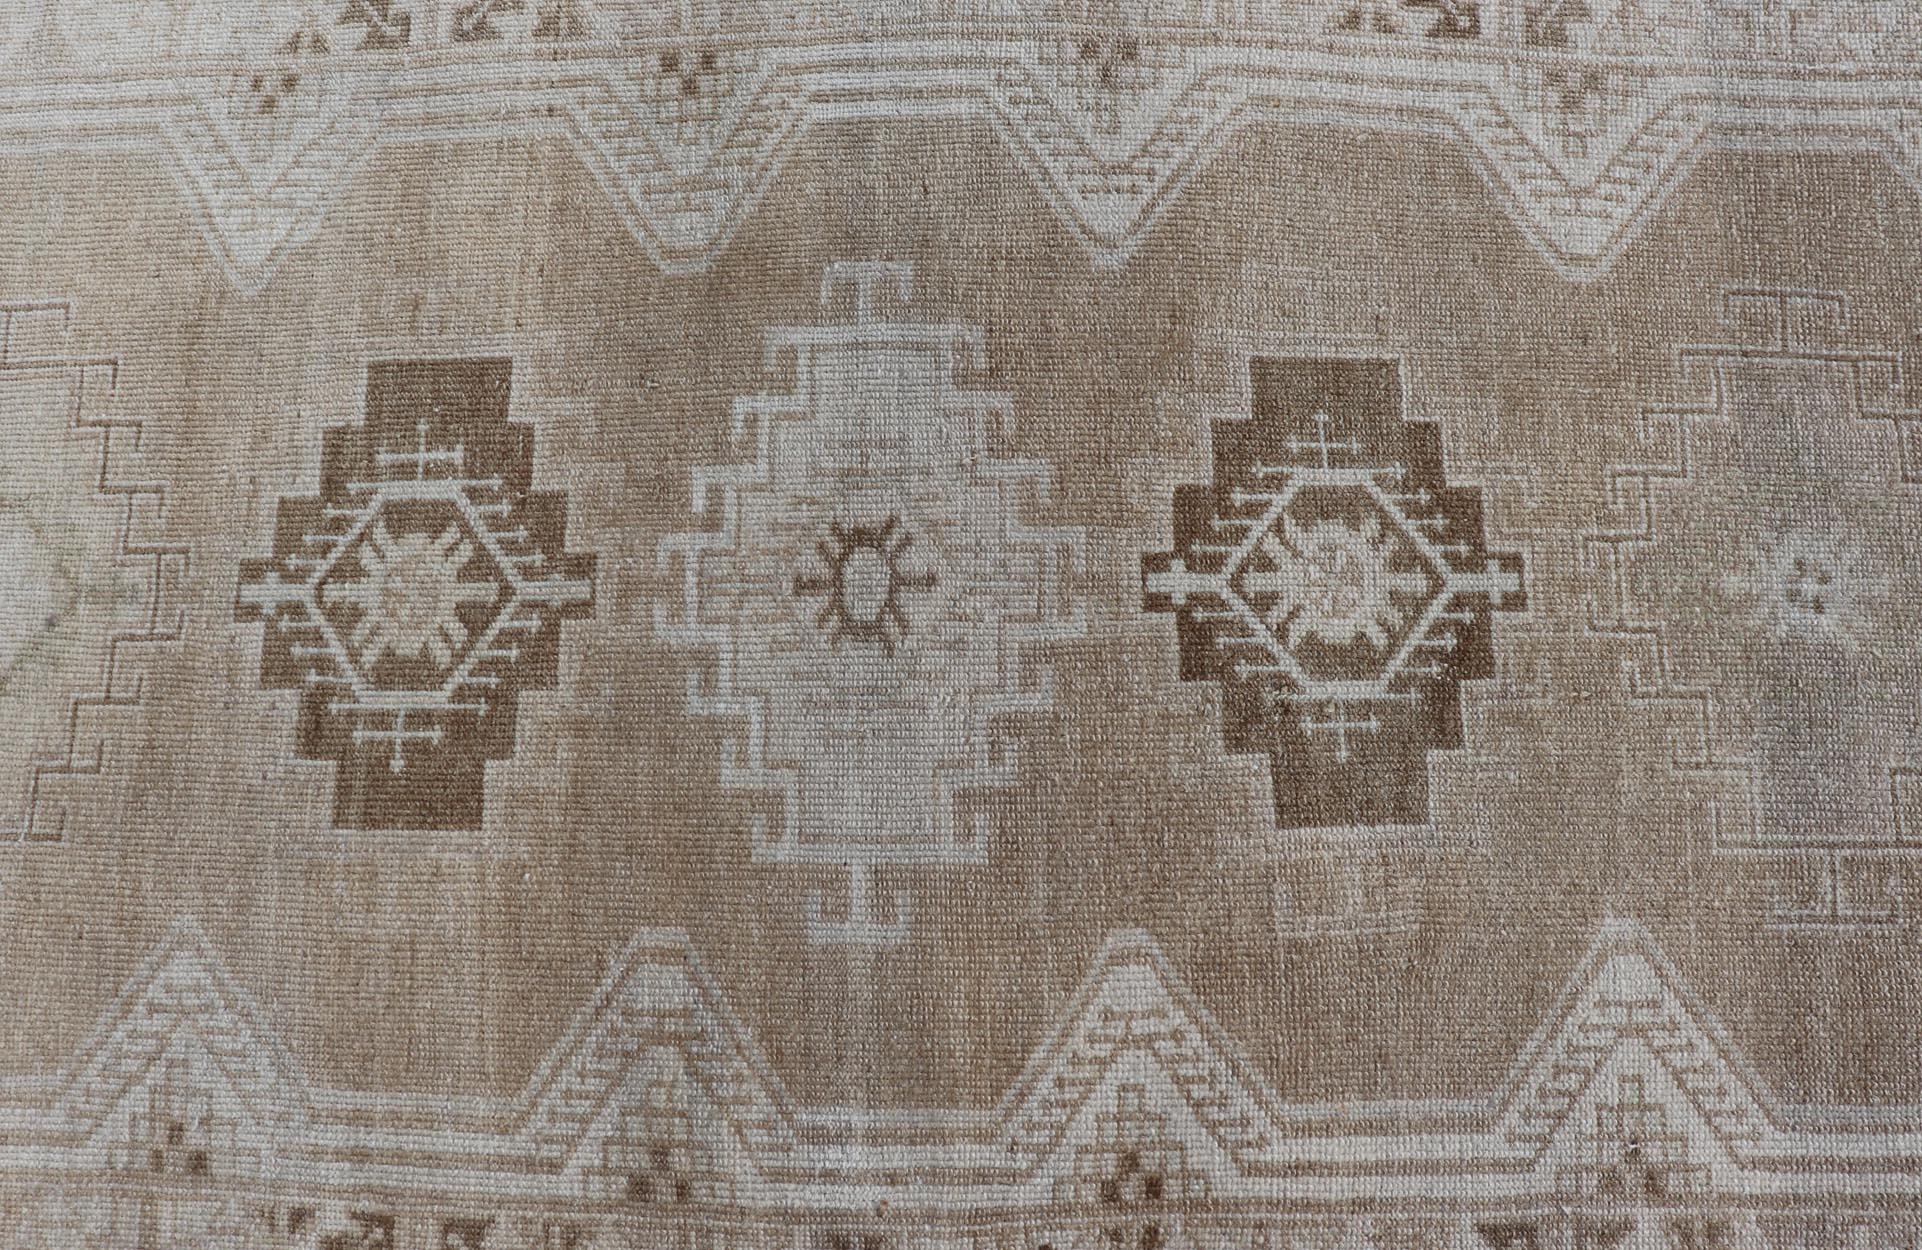 Wool Antique Persian Malayer Runner All-Over  With Medallion Design in Earth Tones For Sale